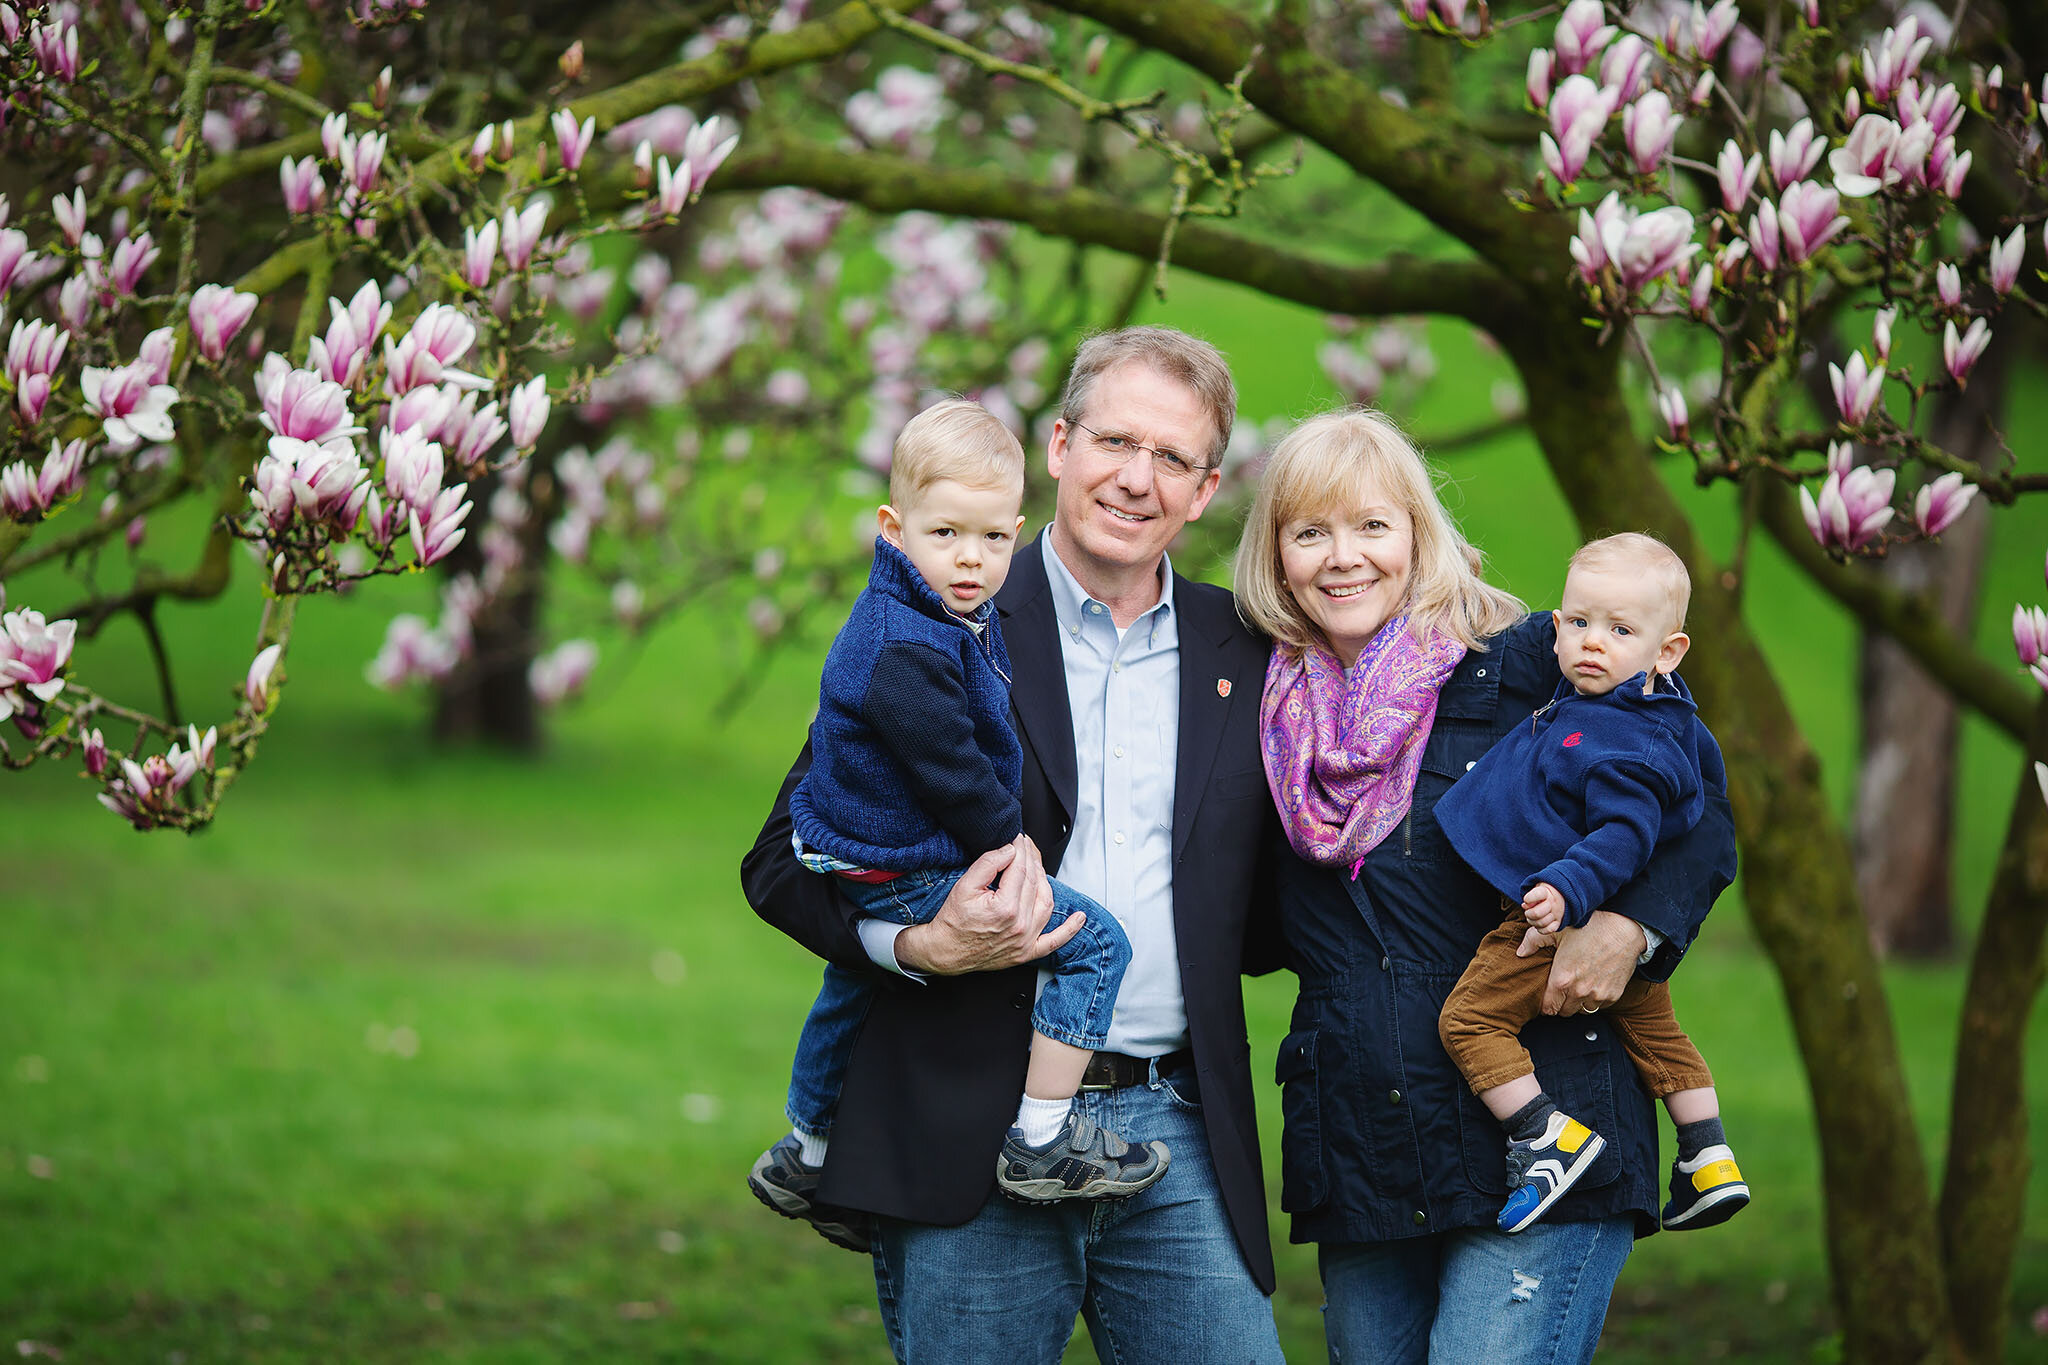 london_ontario_family_photographer-raw_footage_photography-spring_blossoms-extended_family_session-magnolia-blossoms_006.jpg